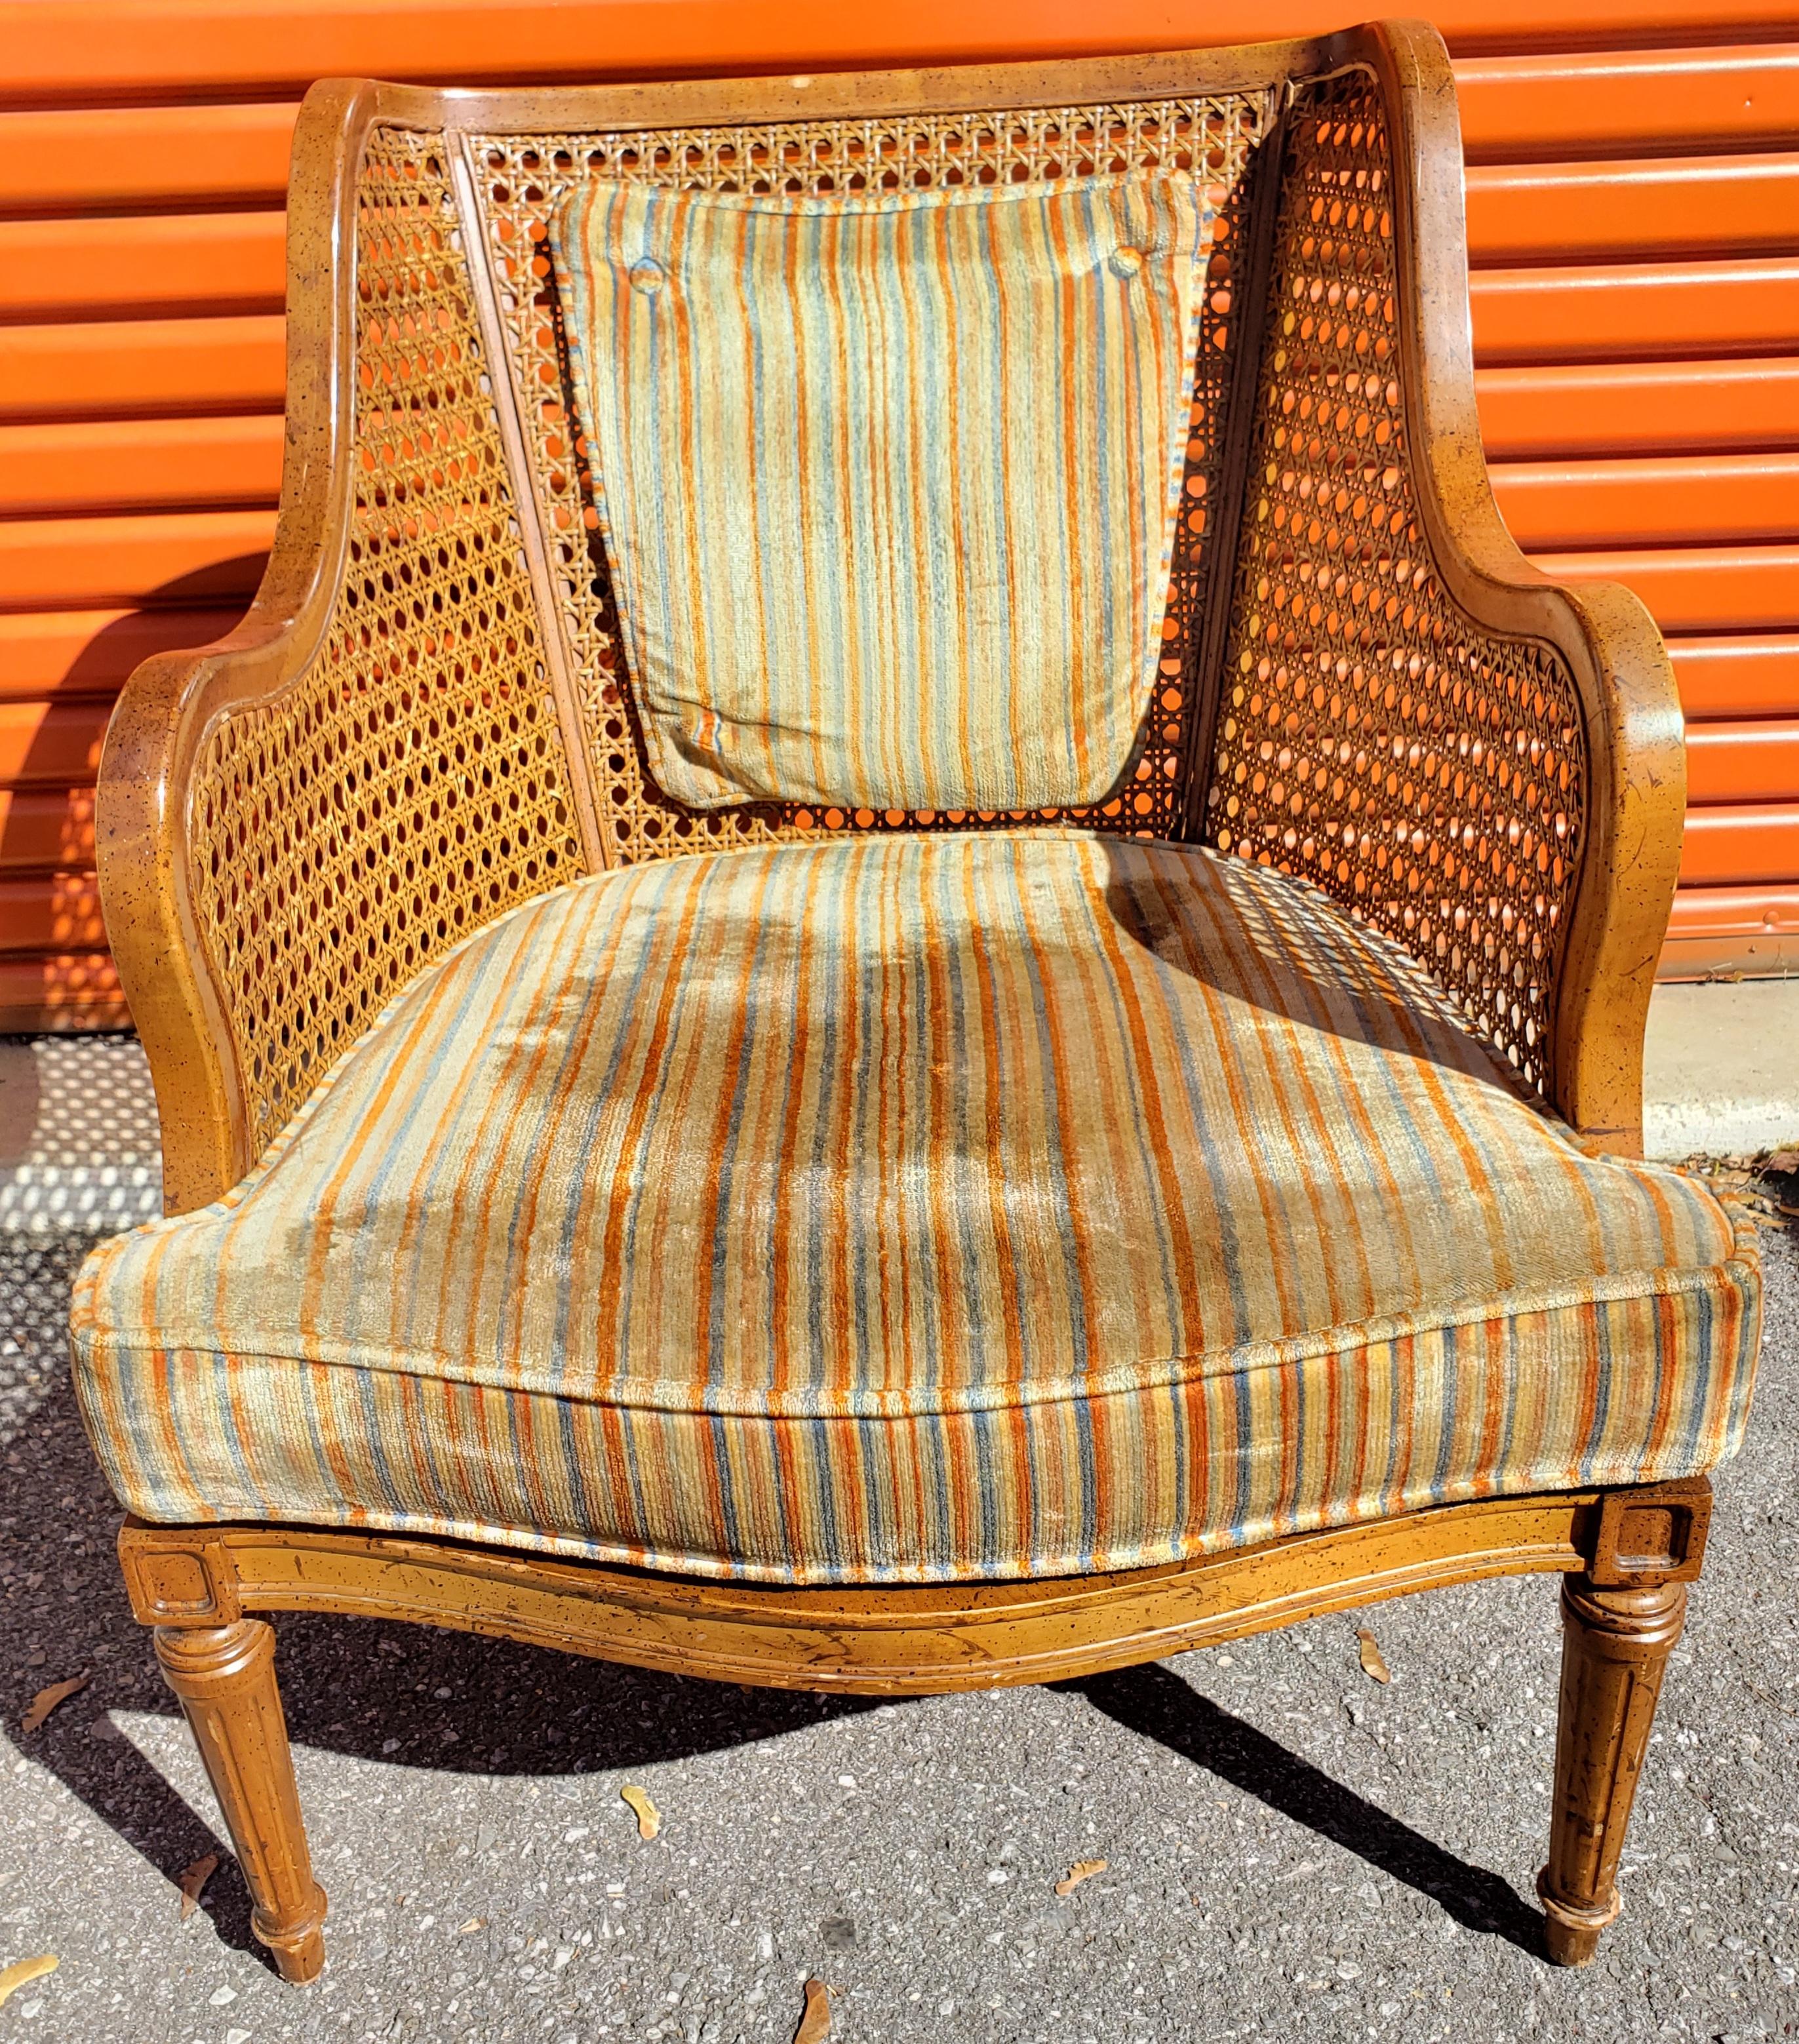 For your consideration is American of Martinsville cane back chair with walnut wood frame and striped upholstery. Loose seat cushion.
Measures 26.5